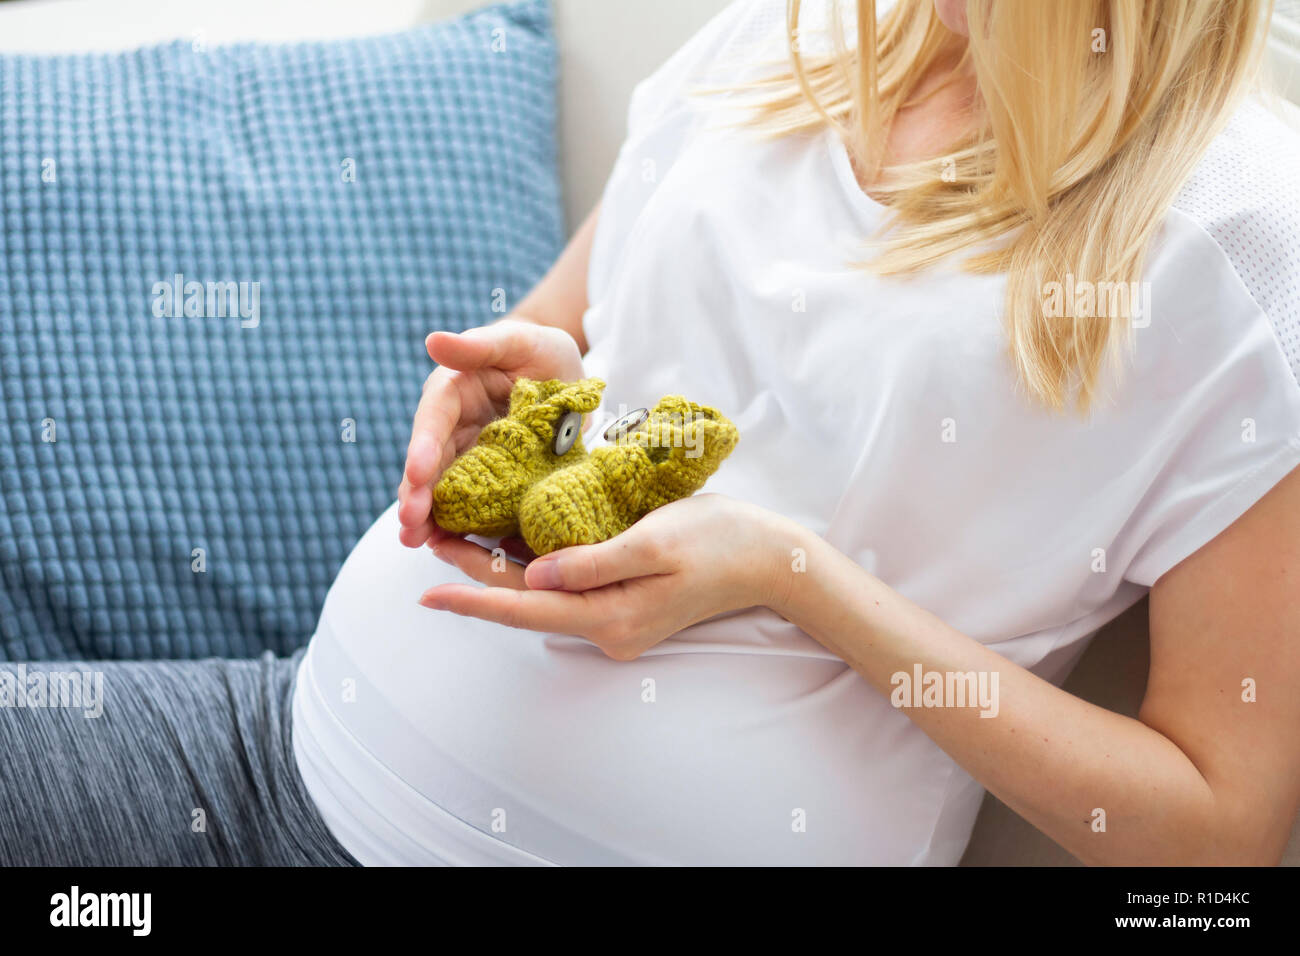 Pregnant woman holding baby booties Banque D'Images